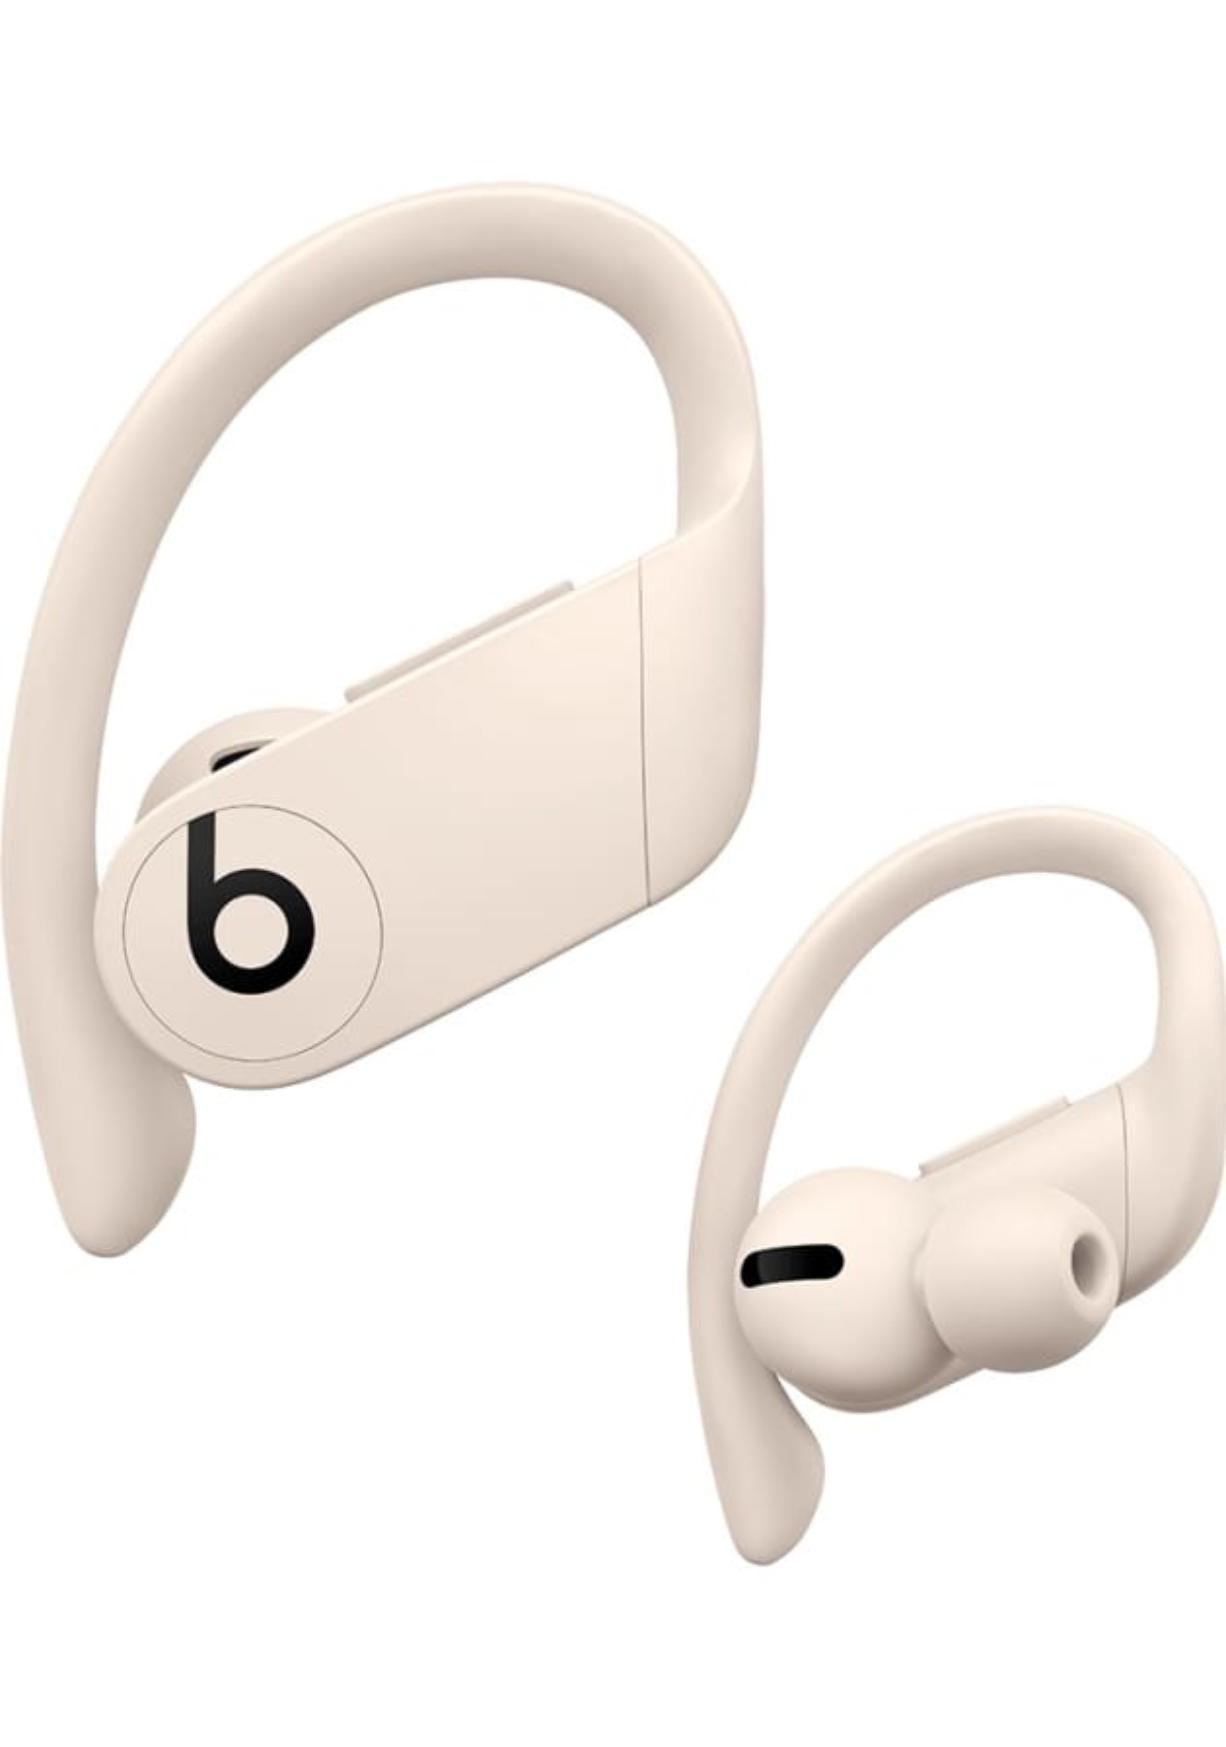 powerbeats pro connected but no sound